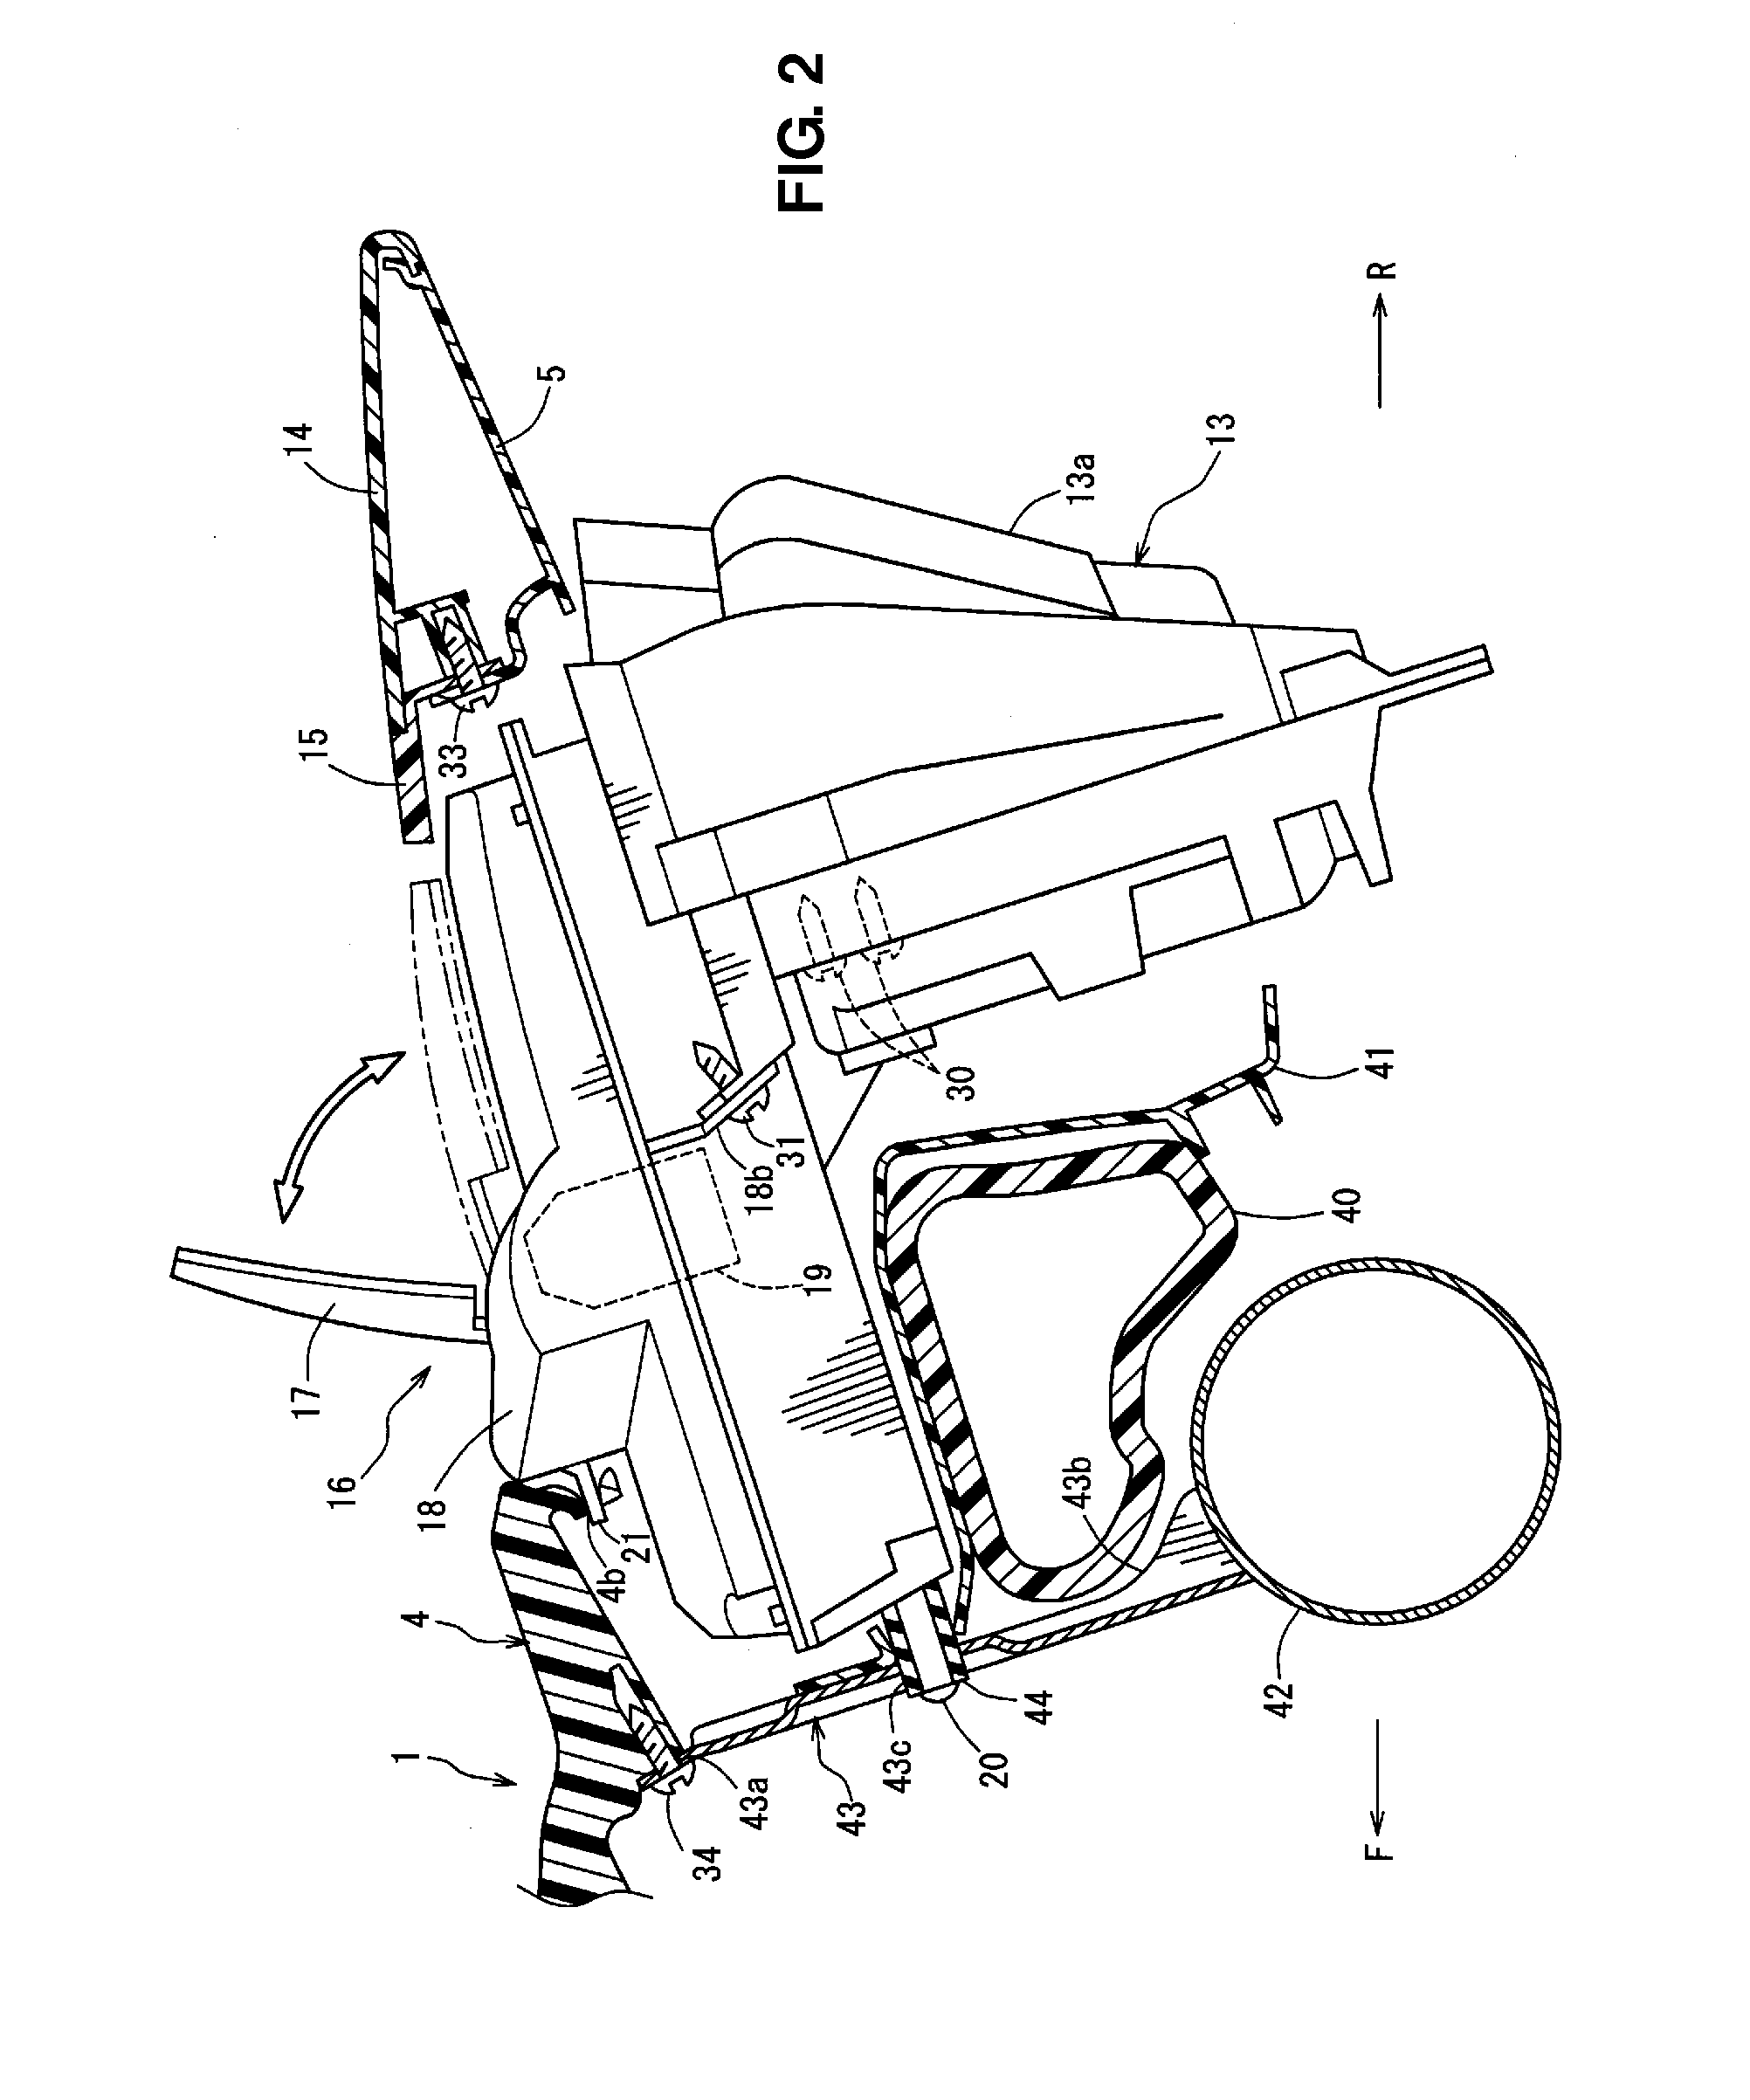 Attachment structure of information display device for vehicle